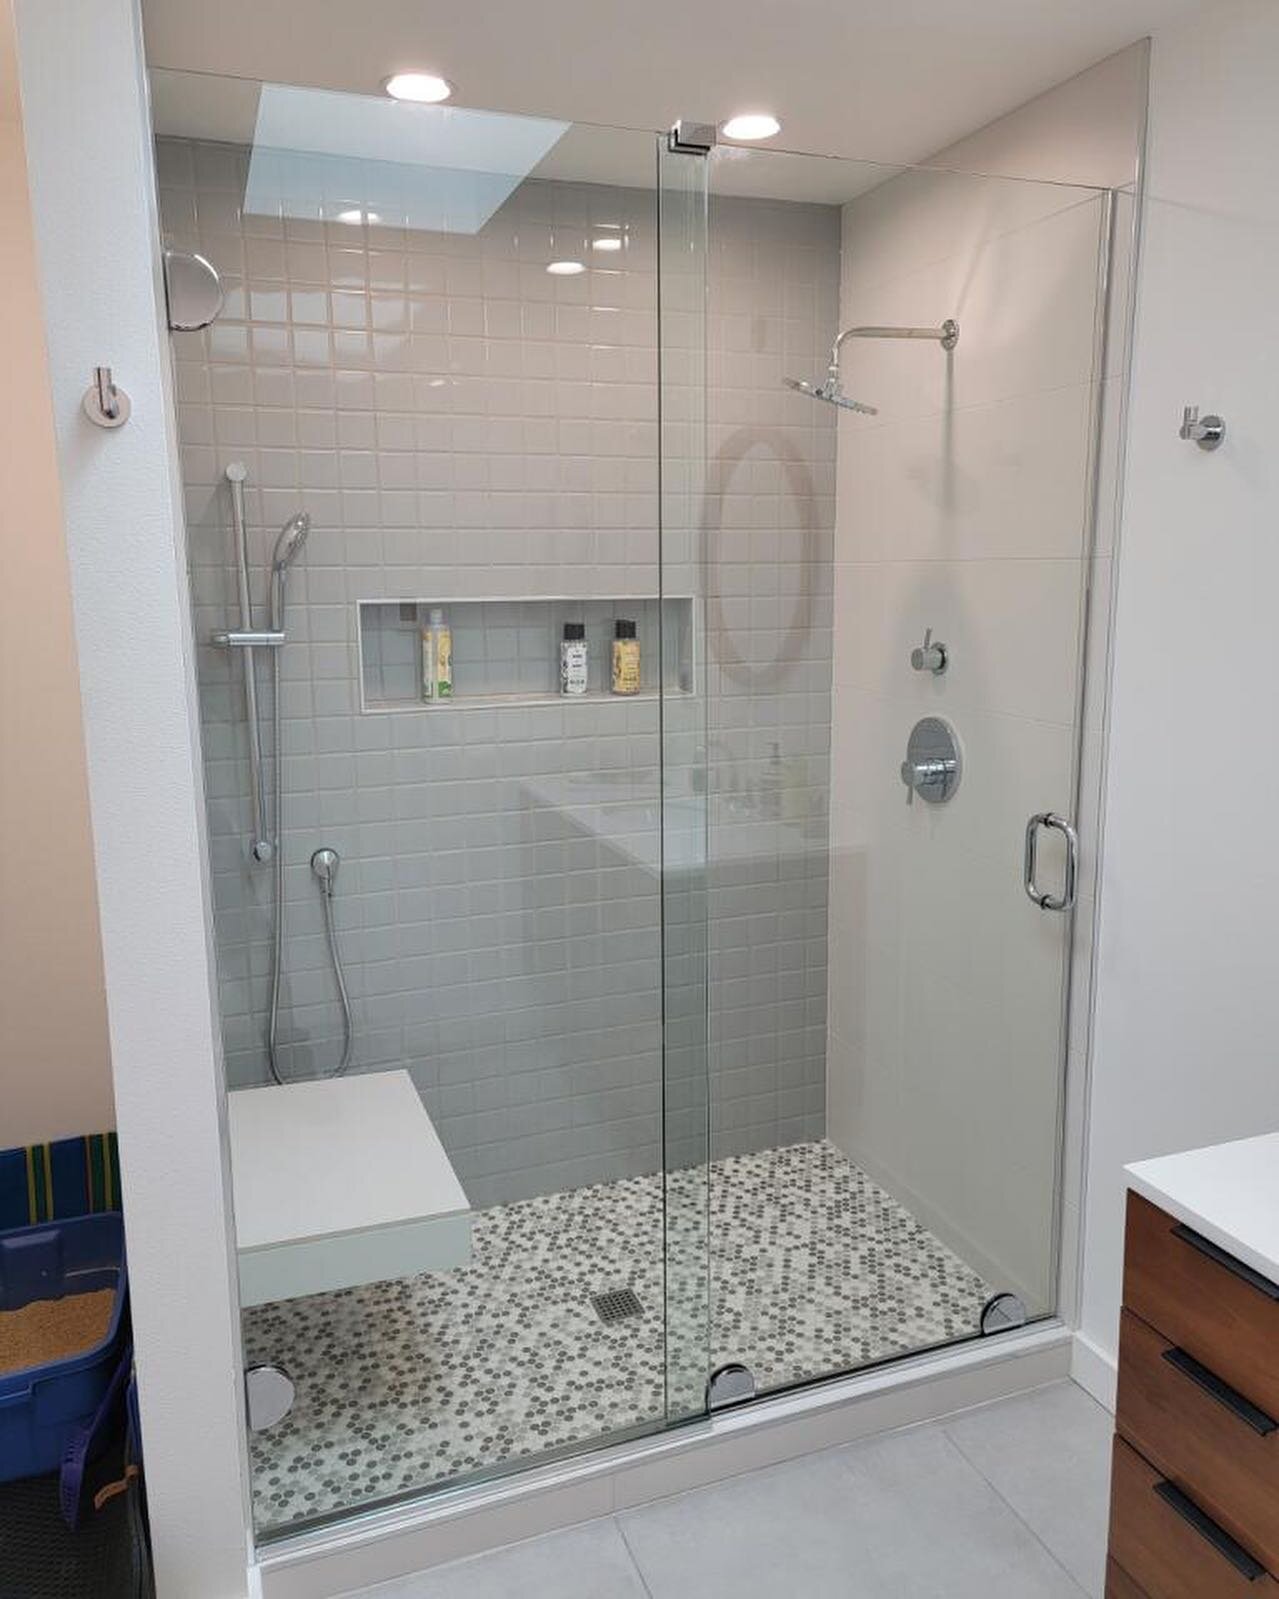 1/2&rdquo; Frameless Slider with Brushed Nickel Hardware installed by our technicians, Marcus and Eddie. 

#seattleshowers #seattleshower#seattleshowerdoors #framelessglassenclosure #framelessglassenclosures #showerenclosure #glassshowerenclosure #fr